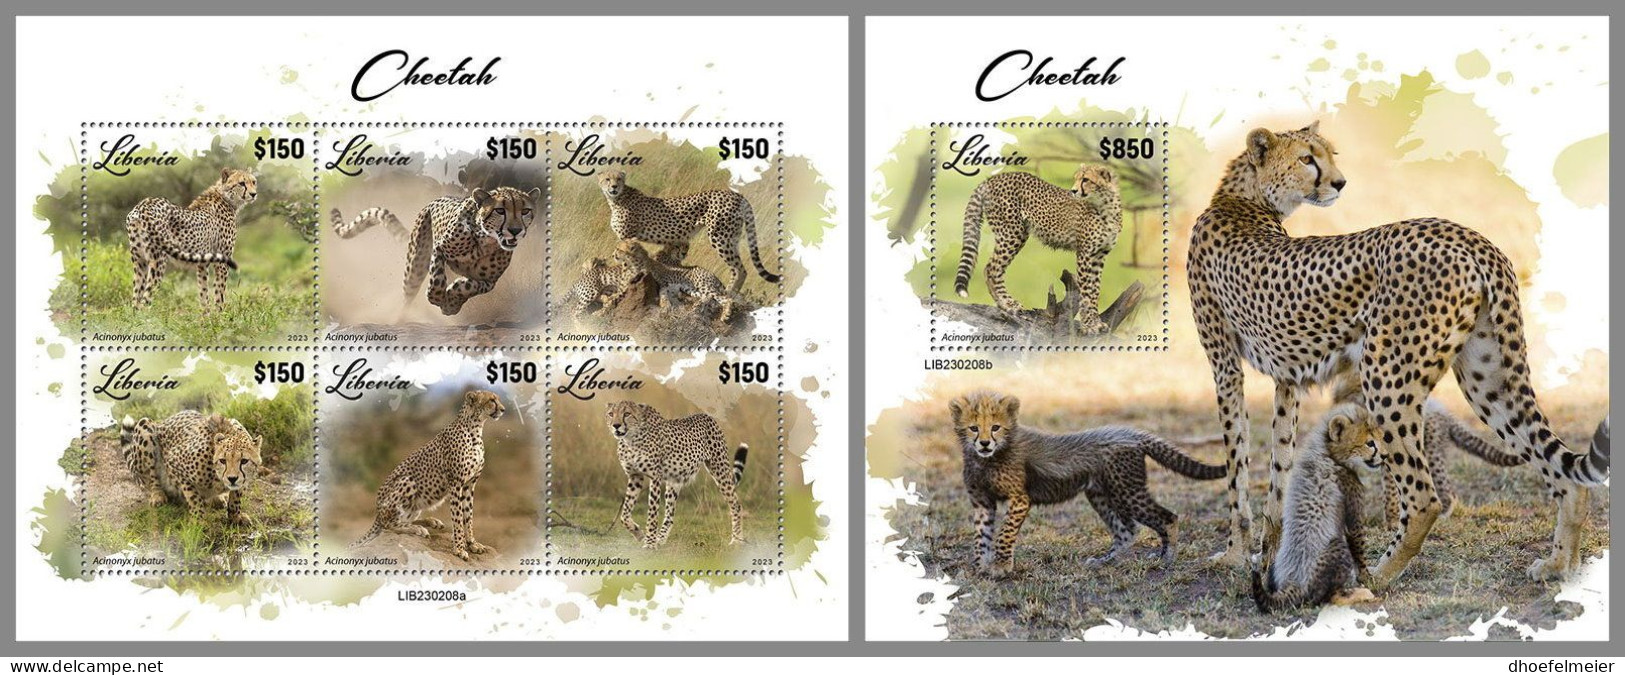 LIBERIA 2023 MNH Cheetah Geparden M/S+S/S – OFFICIAL ISSUE – DHQ2417 - Big Cats (cats Of Prey)